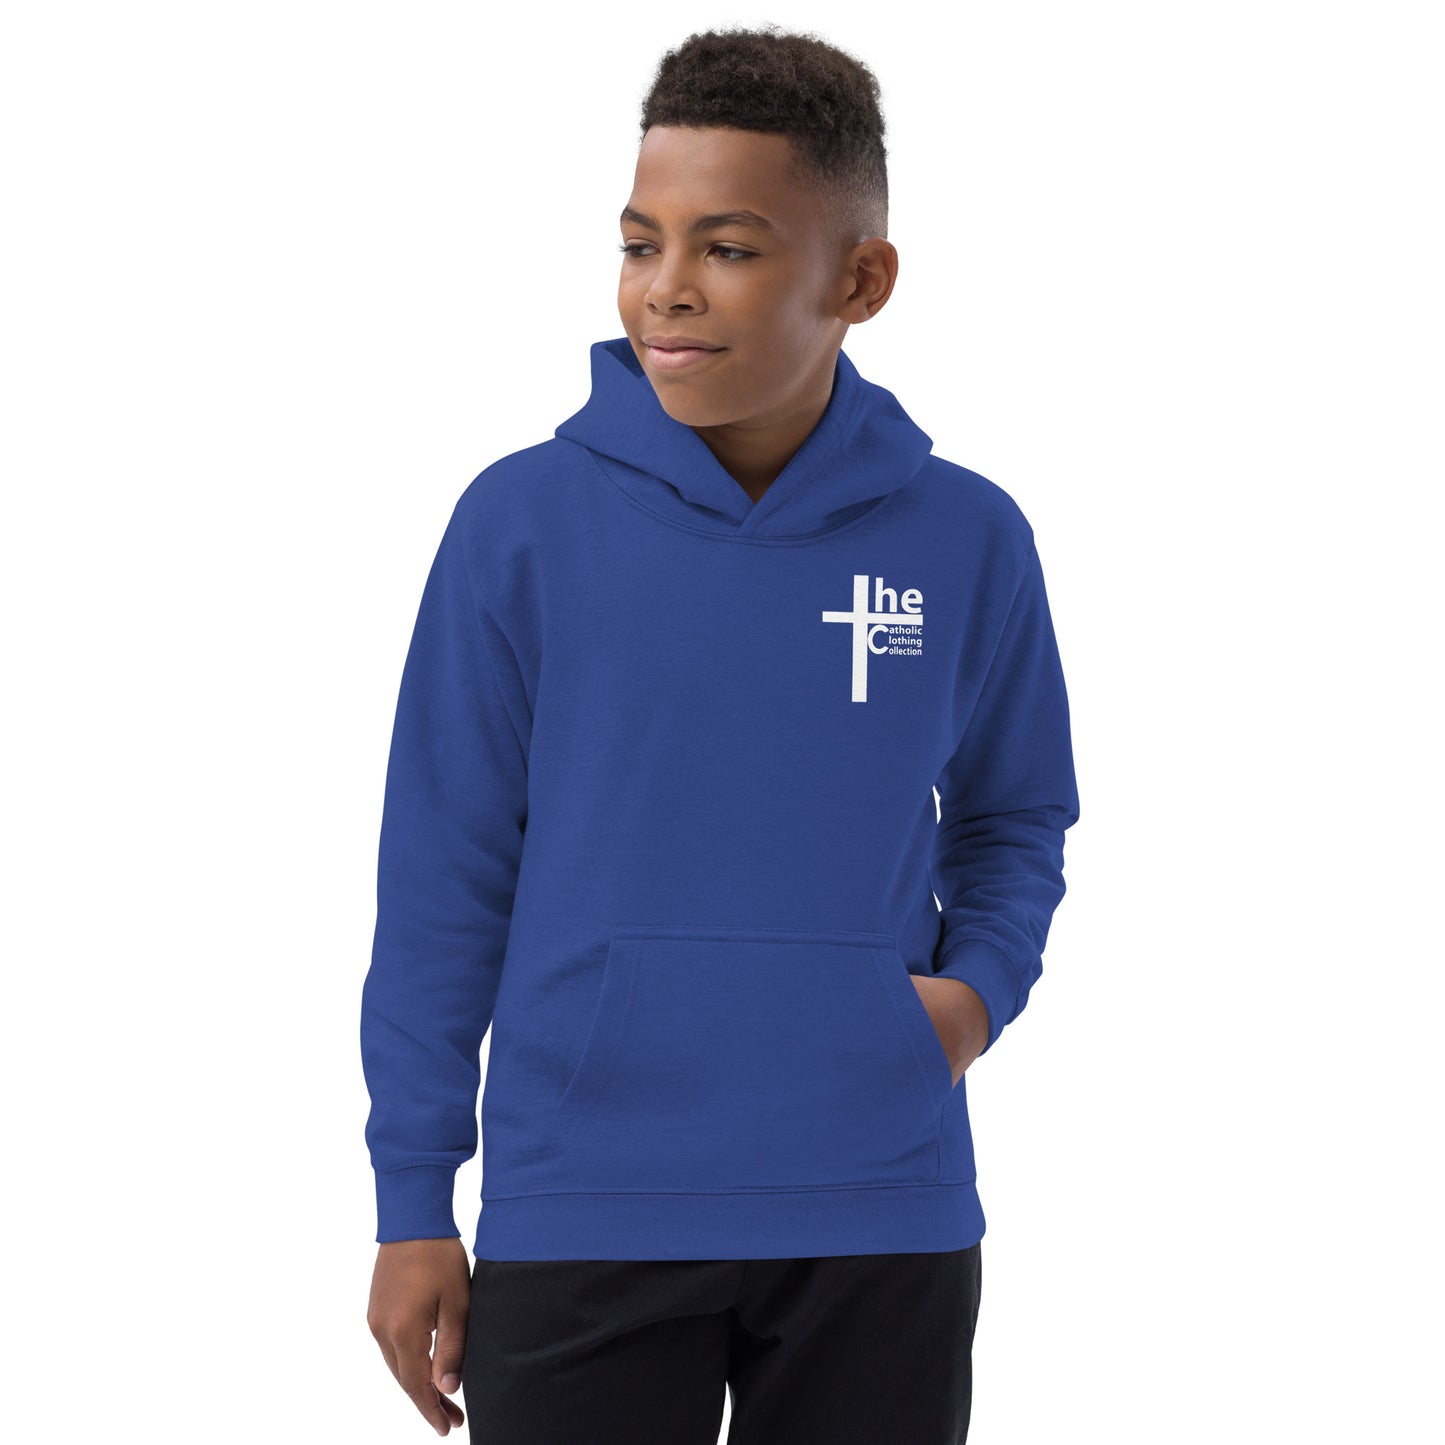 Our Lady of Lourdes Children's Hoodie